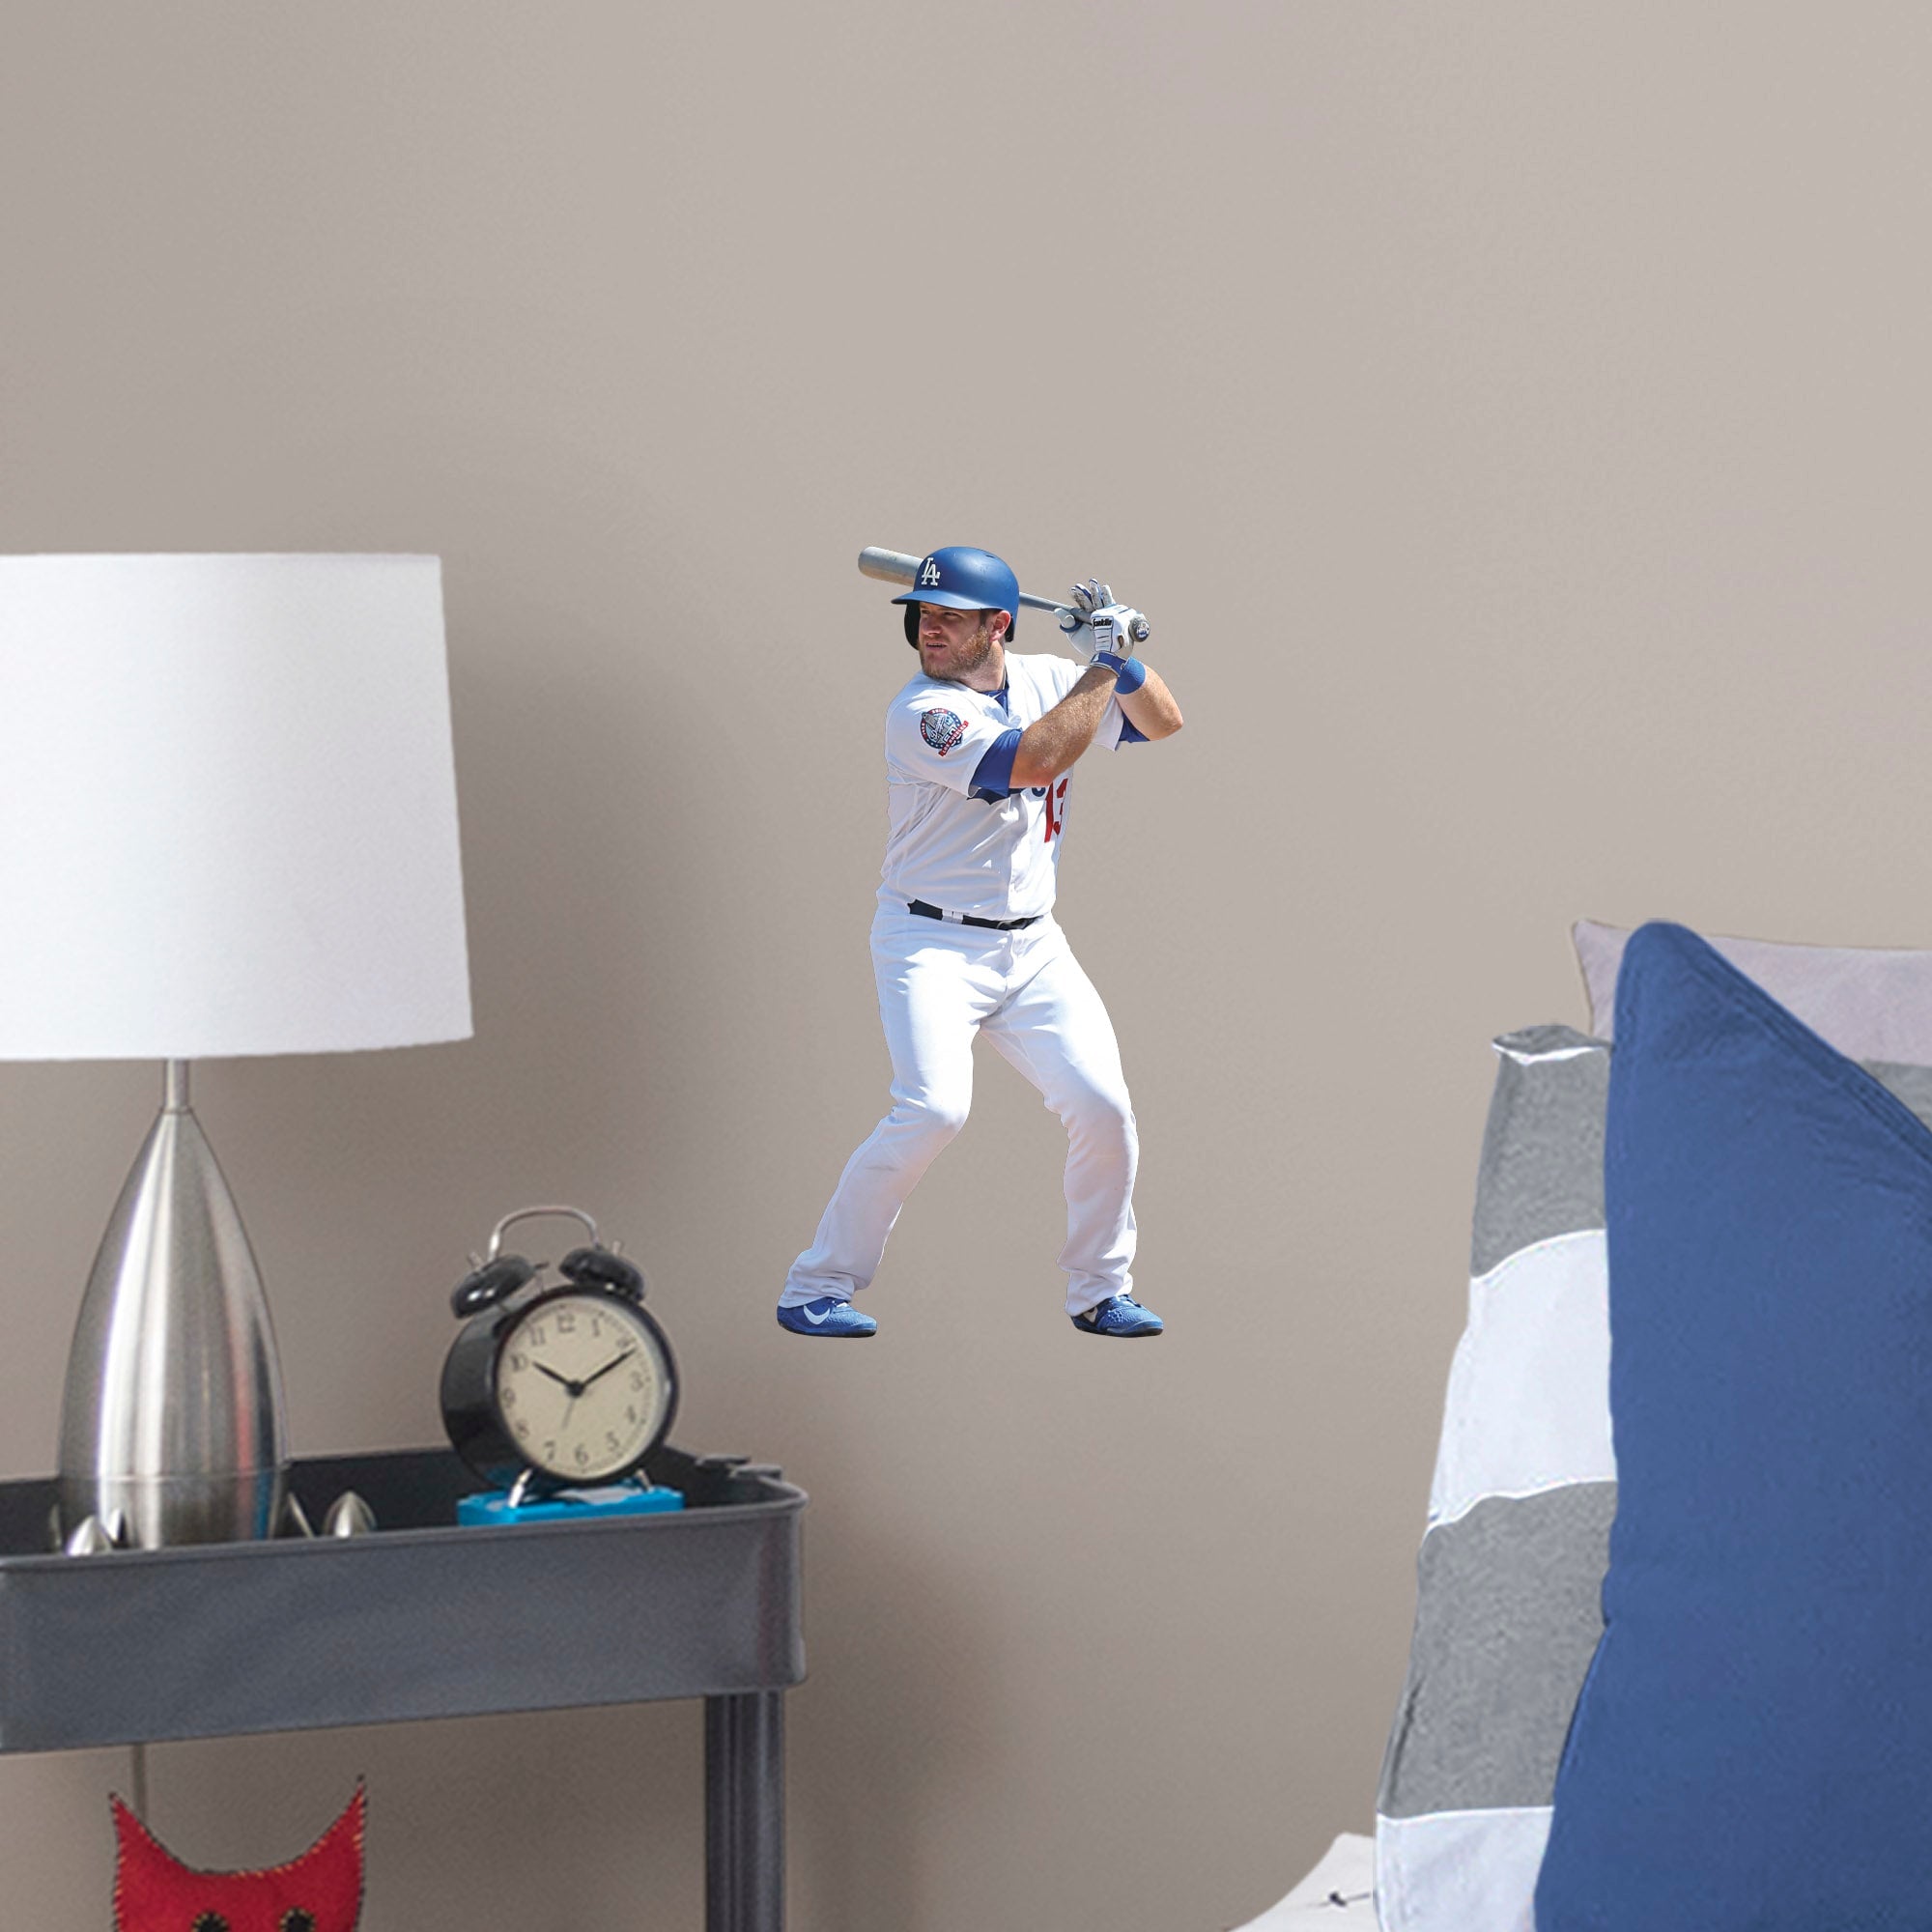 Max Muncy for Los Angeles Dodgers - Officially Licensed MLB Removable Wall Decal Large by Fathead | Vinyl